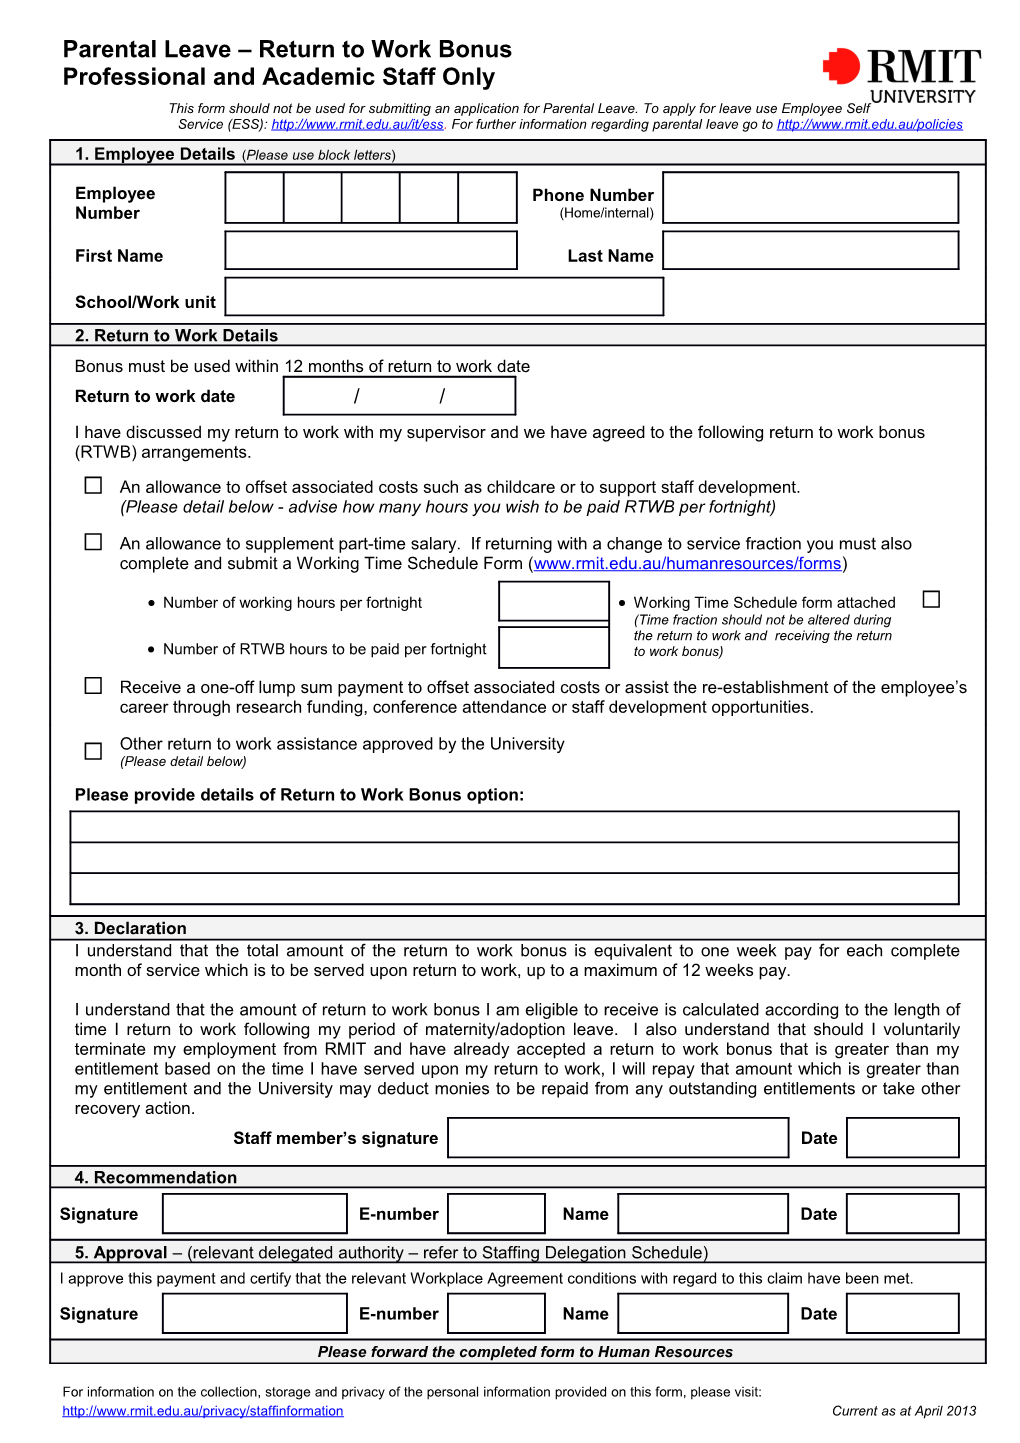 Application for 48/52 Week Employment Cycle